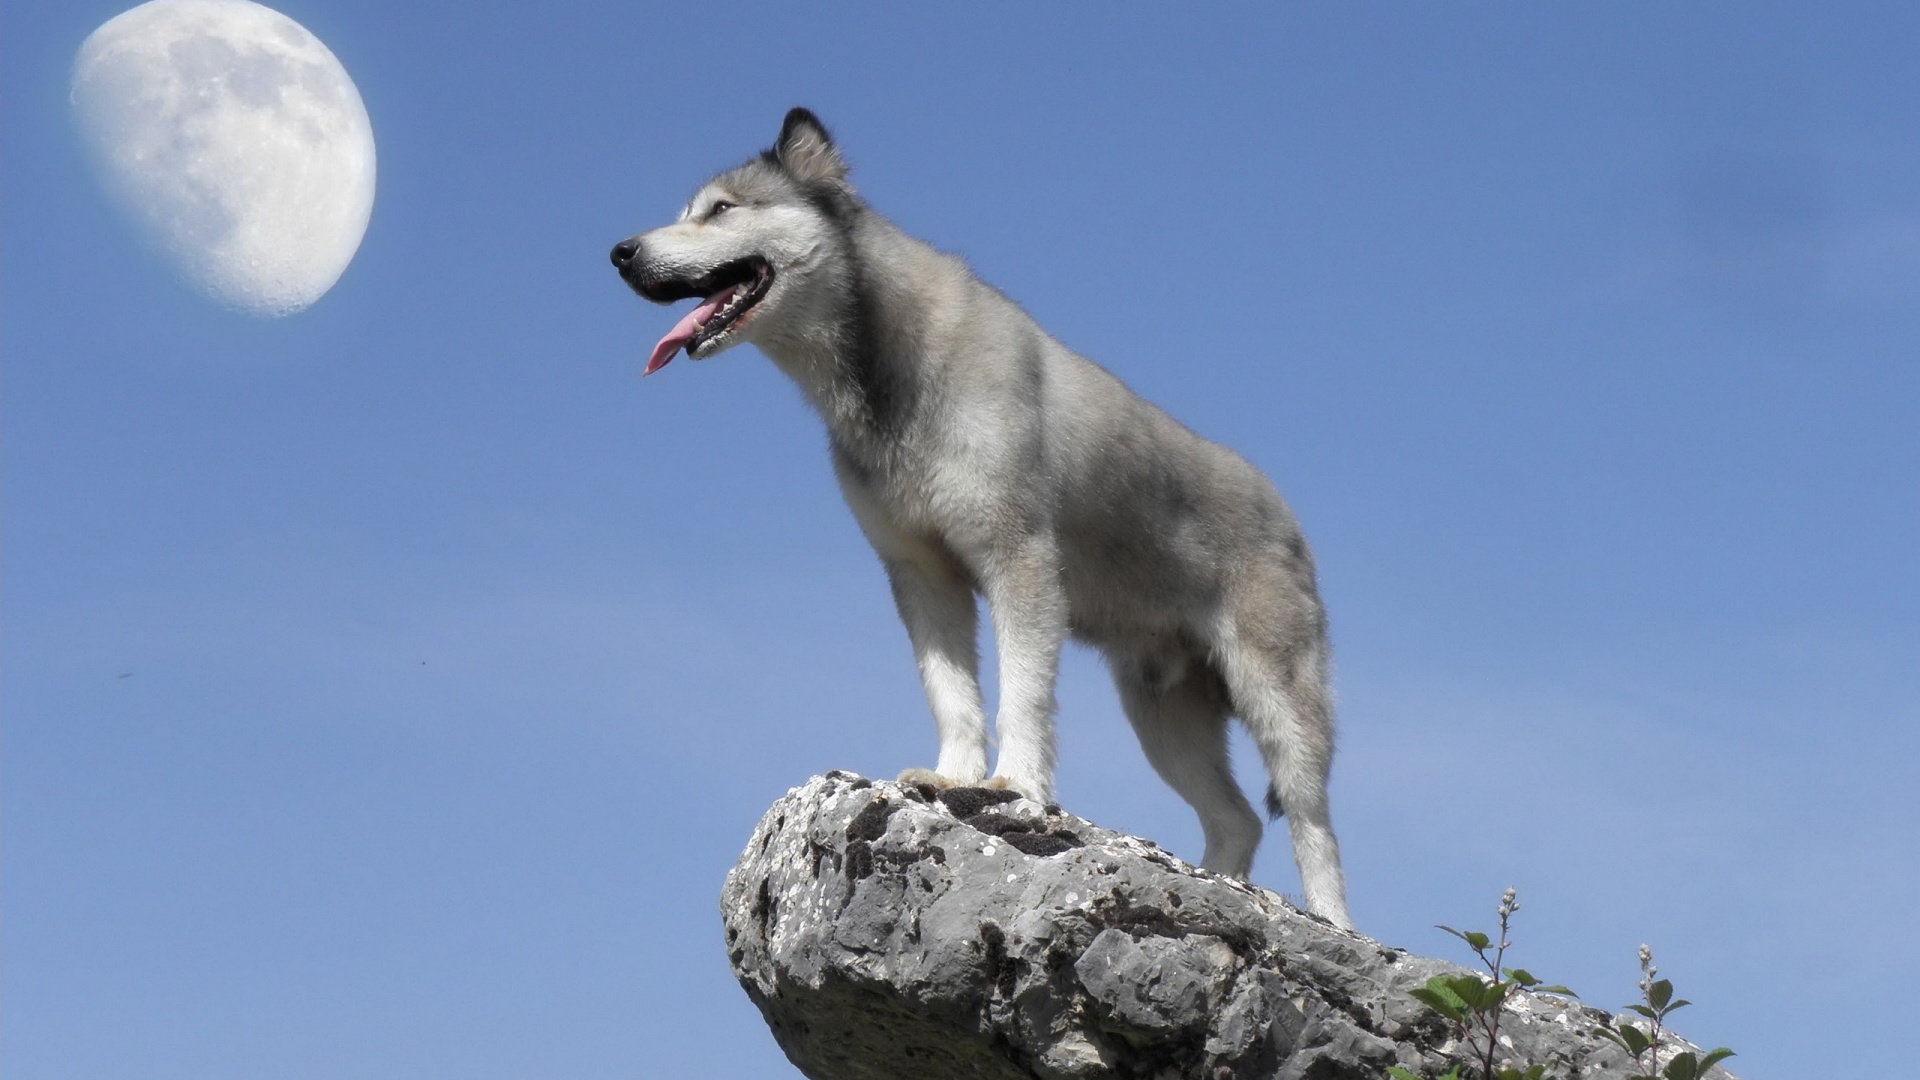 White and Gray Siberian Husky on Gray Rock During Daytime. Wallpaper in 1920x1080 Resolution